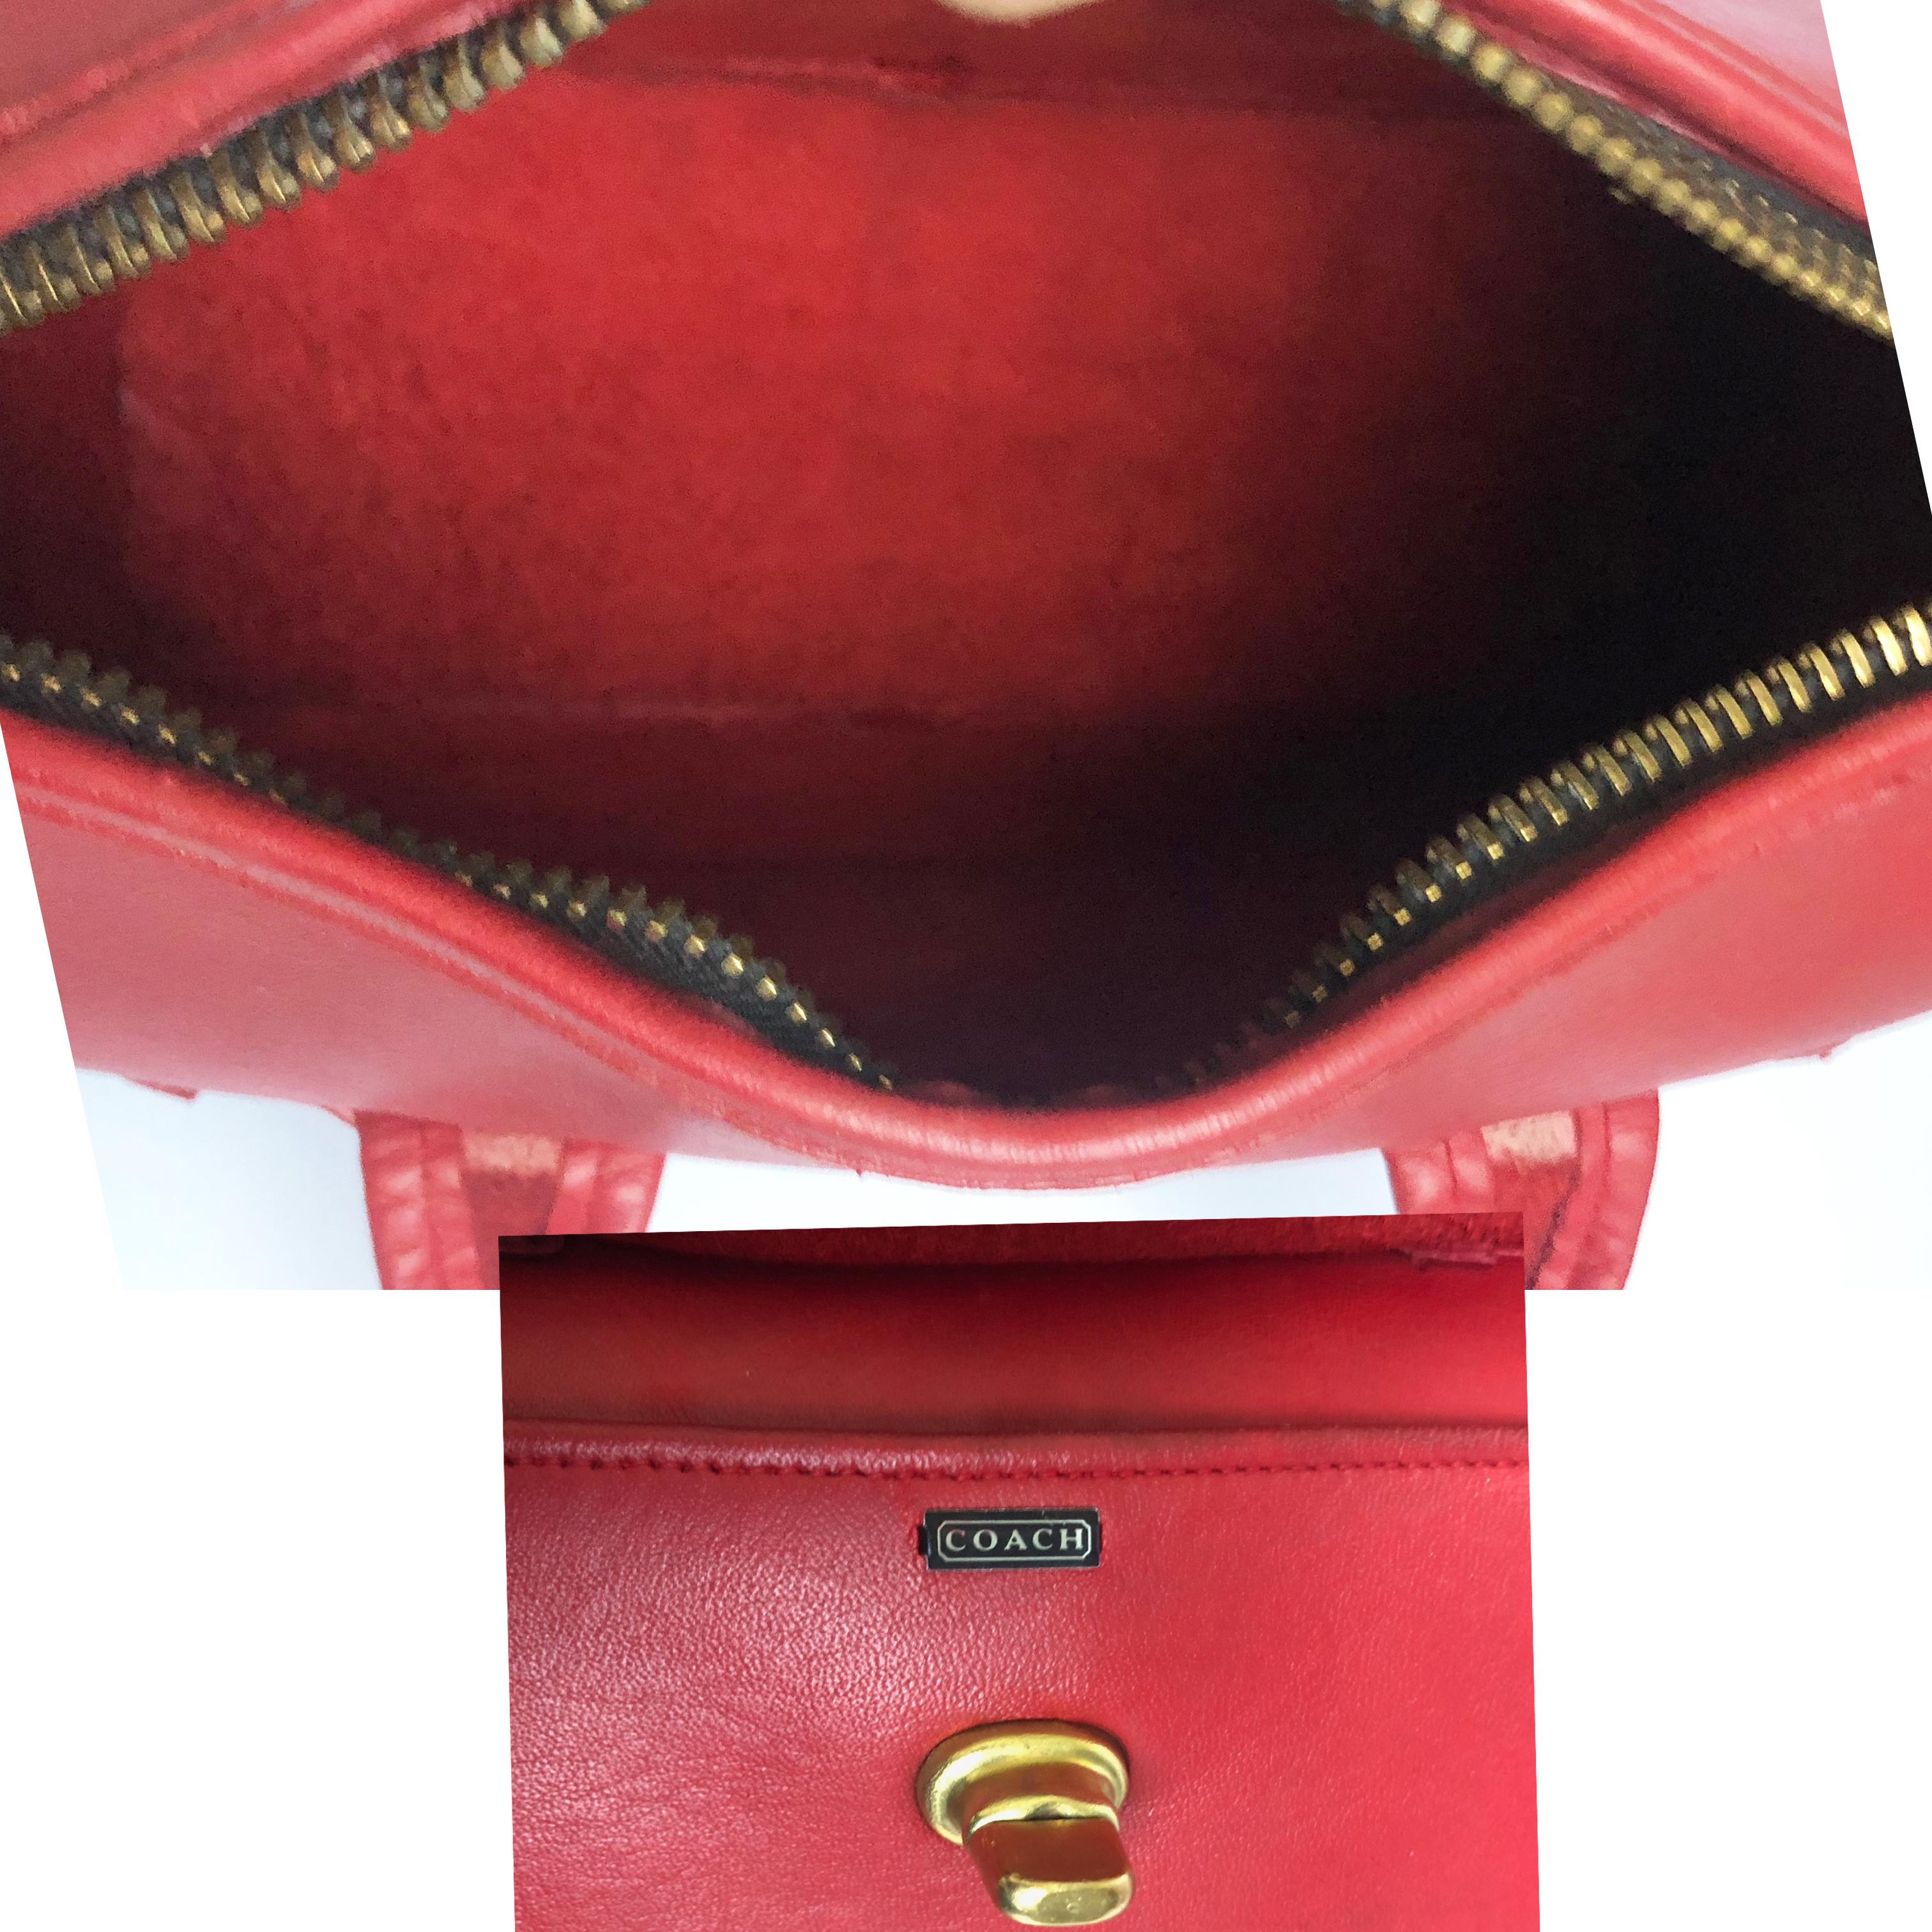 Bonnie Cashin for Coach Satchel Double Side Turn Lock Tote Bag Red Leather 60s 2